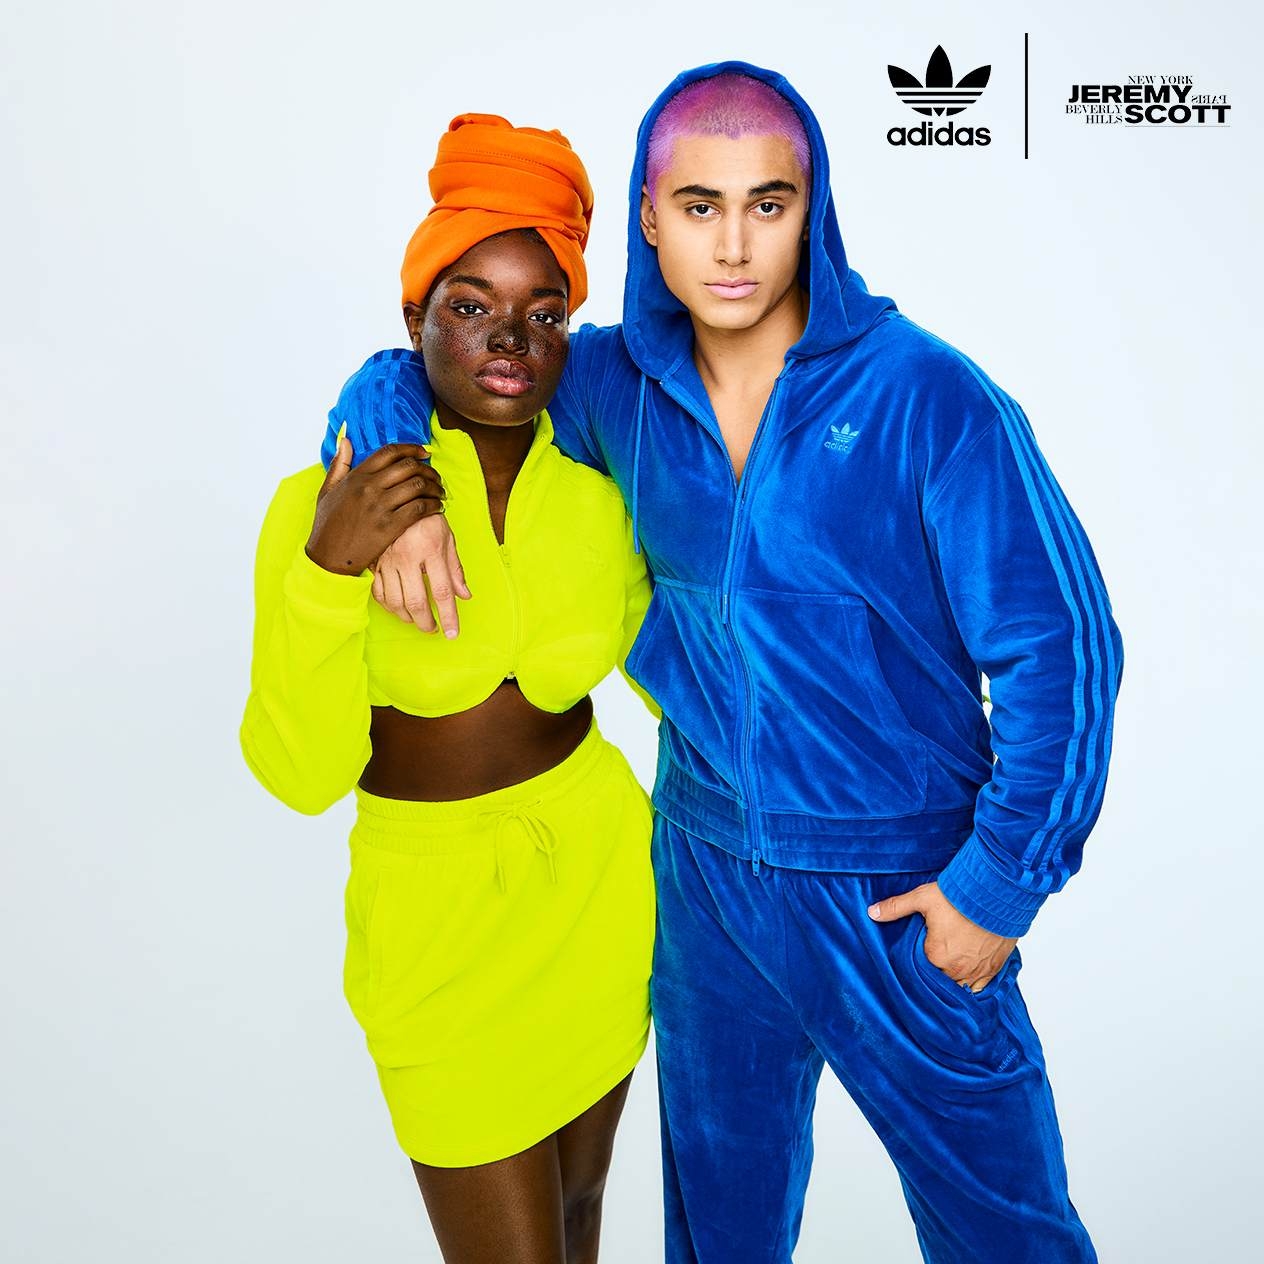 CoqCreative power by ProductionLink s.r.l. Adidas  Jeremy Scott Adidas--Jeremy-Scott  Adidas  Jeremy Scott